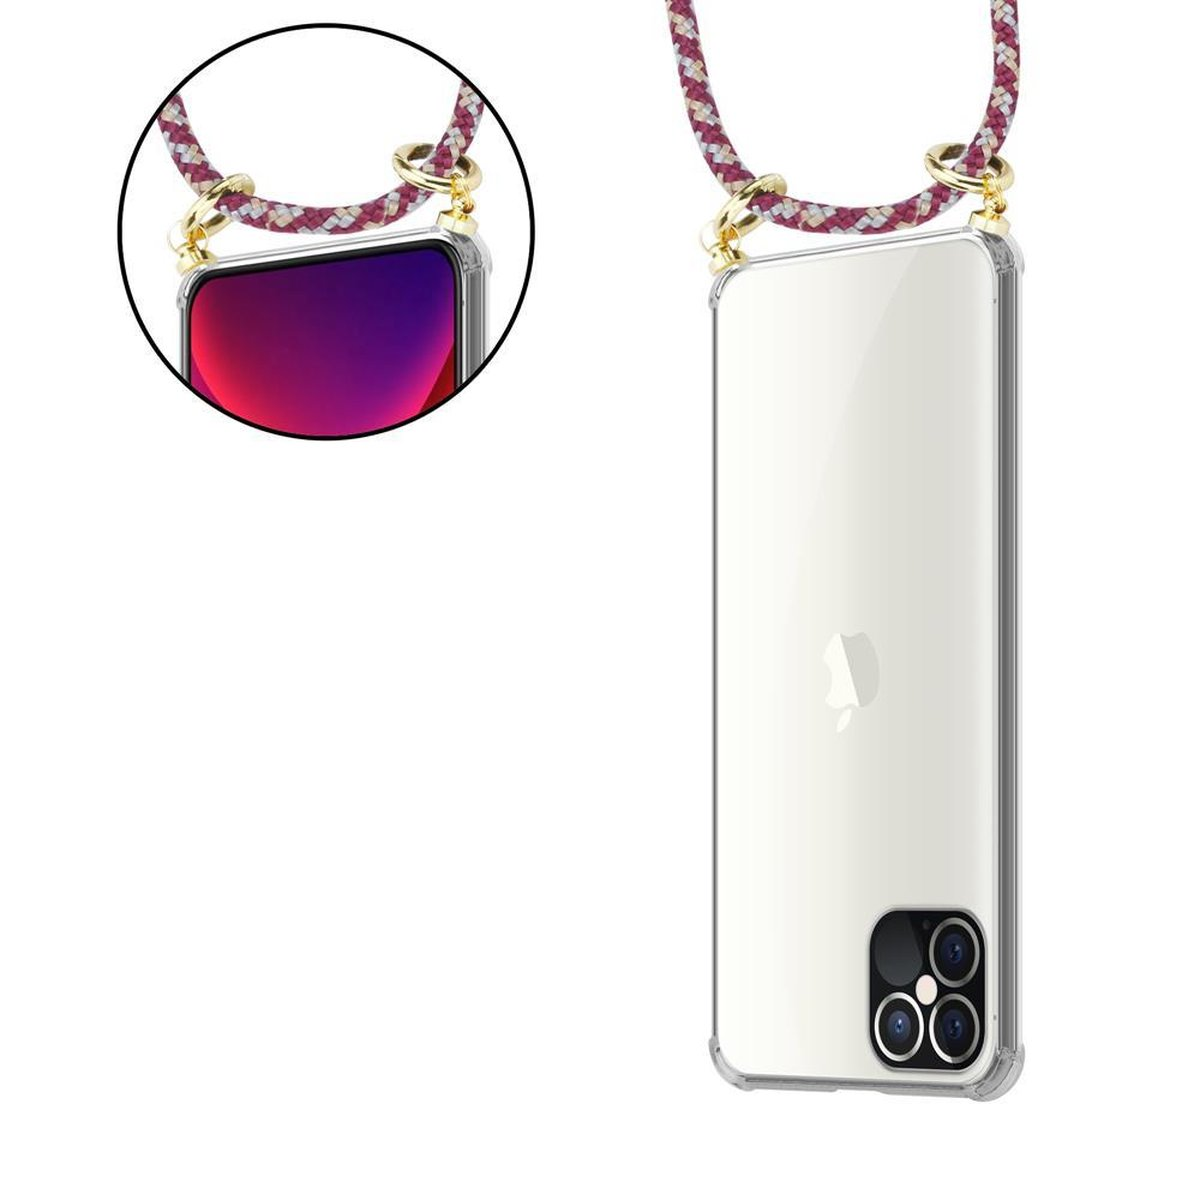 abnehmbarer PRO Handy Kette und 12 Ringen, Kordel Gold iPhone Hülle, mit MAX, Backcover, Apple, ROT CADORABO Band GELB WEIß